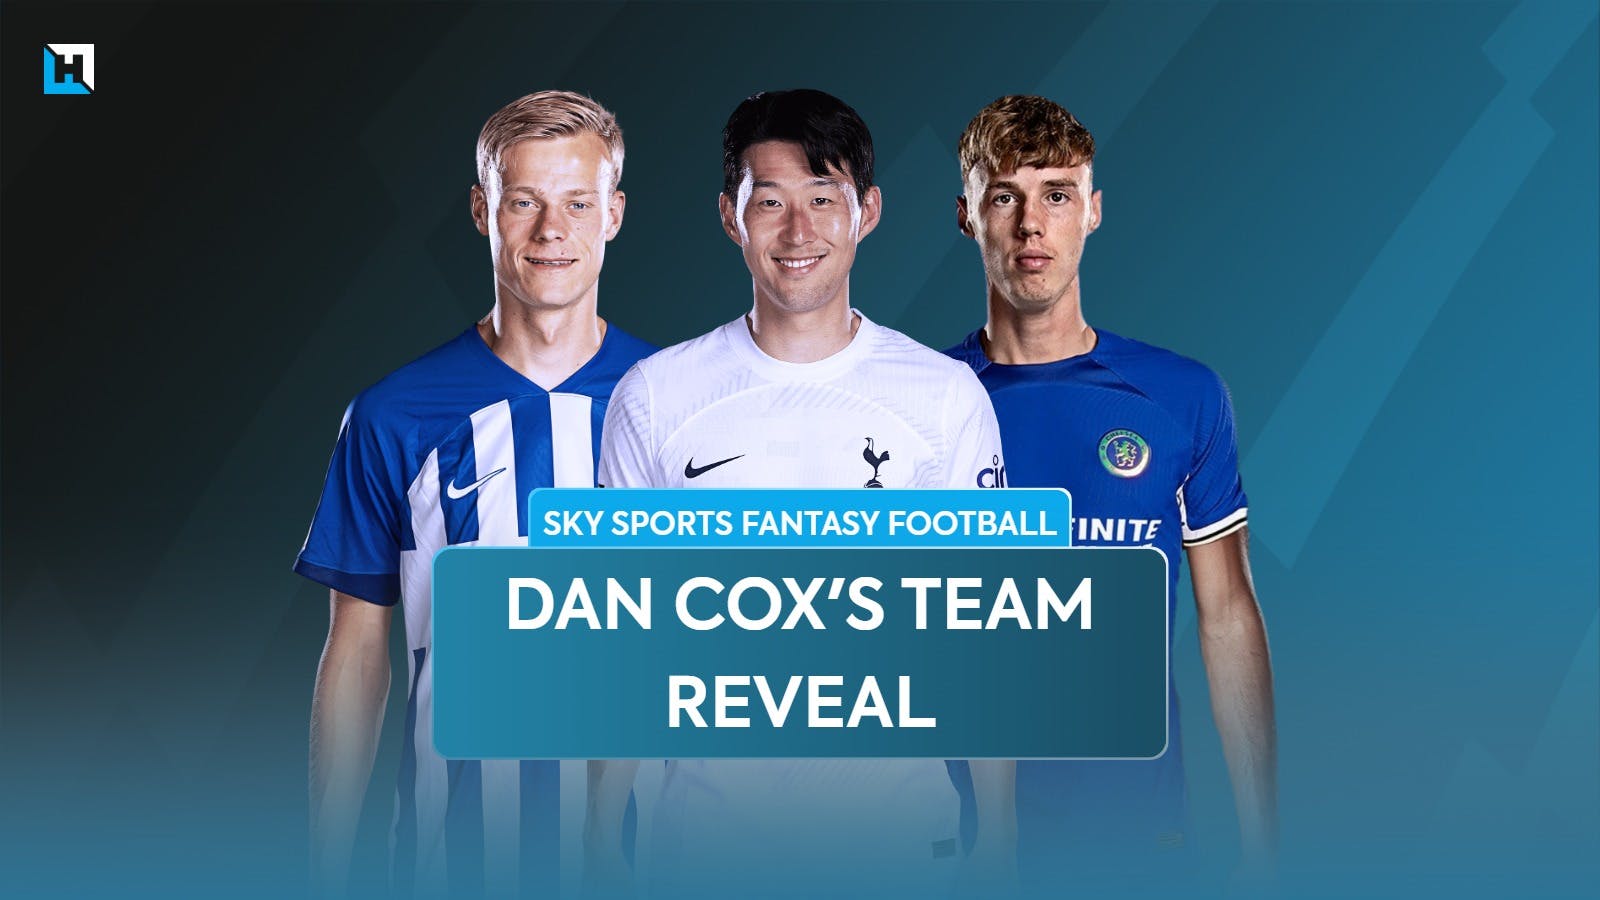 Dan Cox’s Sky Sports Fantasy Football Gameweek 37 preview and team reveal